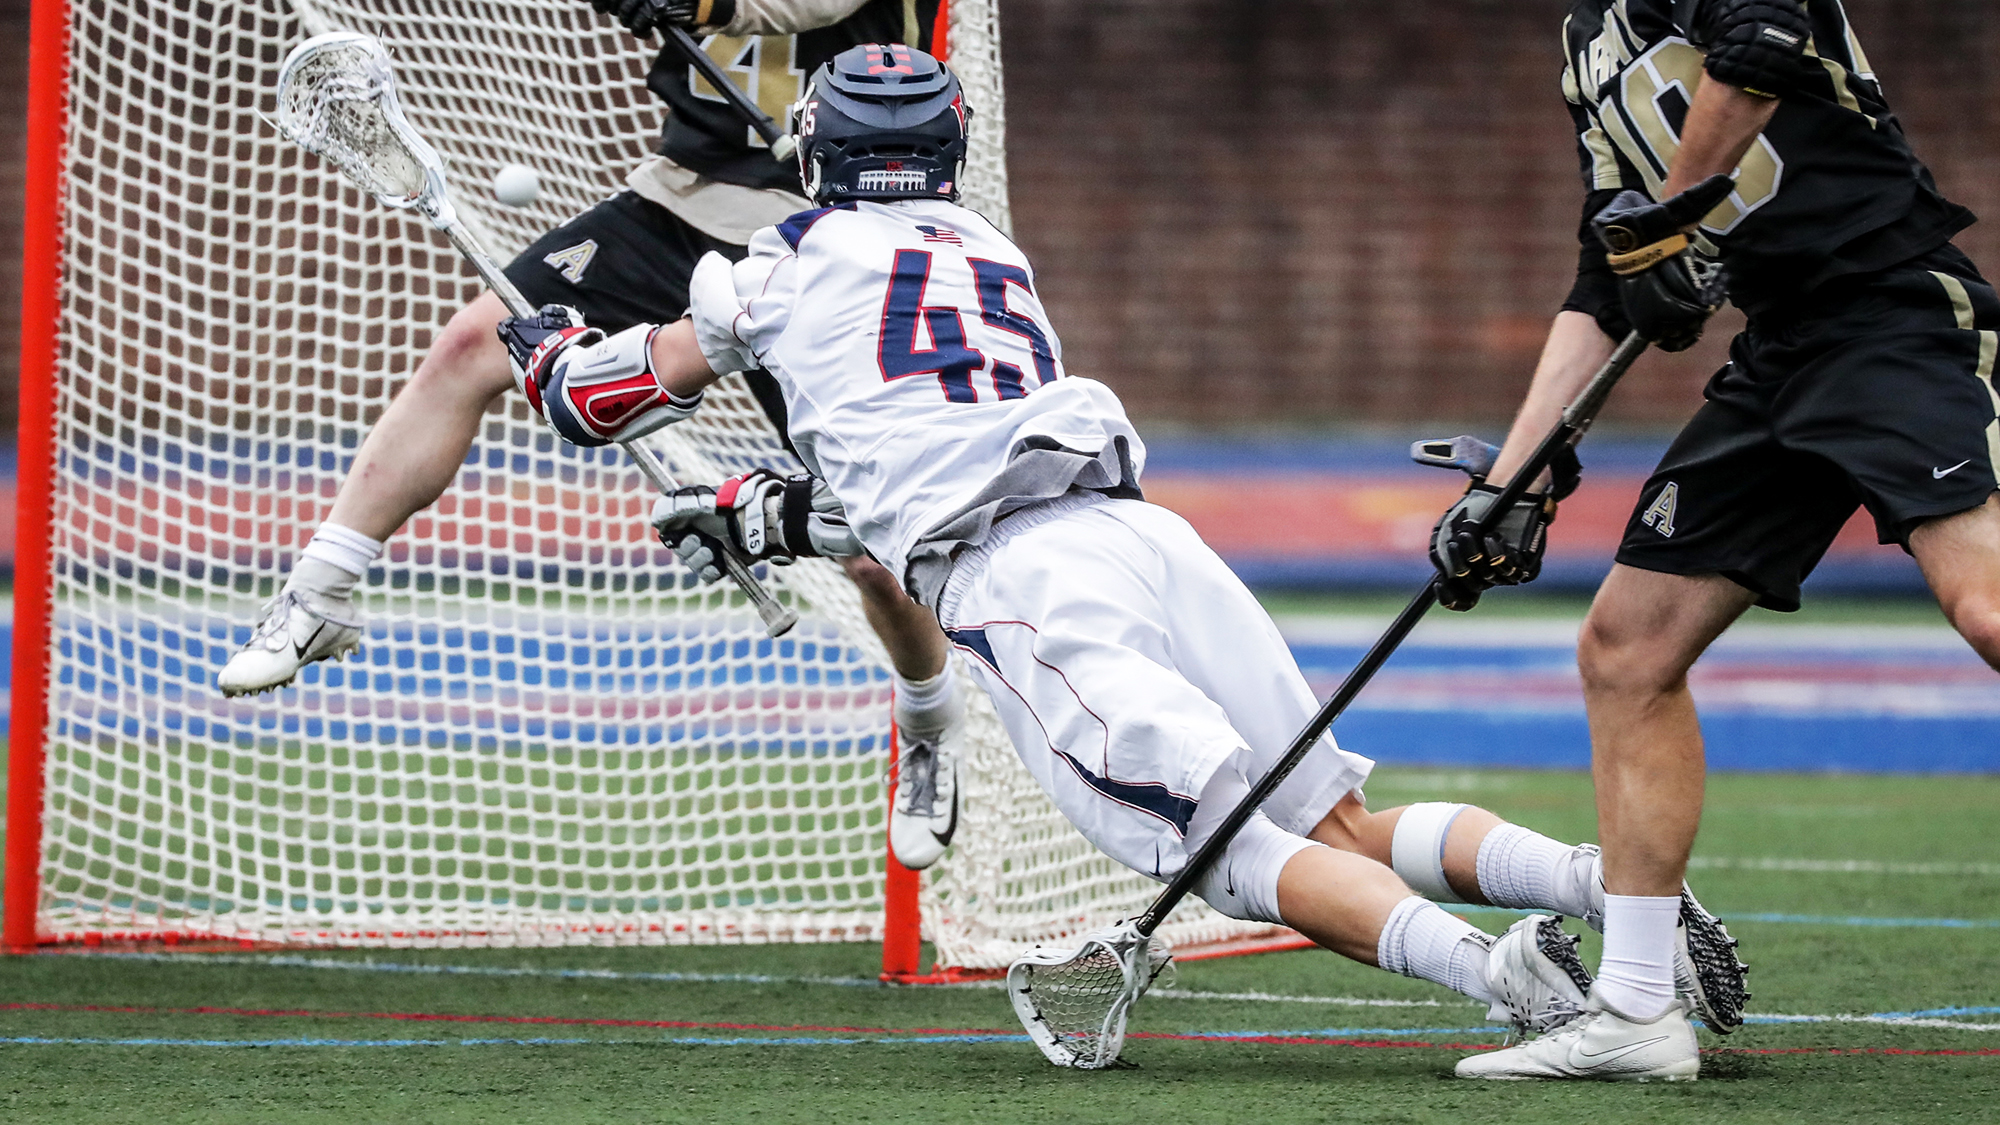 Simon Mathias shoots the ball in the next against Army at Franklin Field during an NCAA first round game.